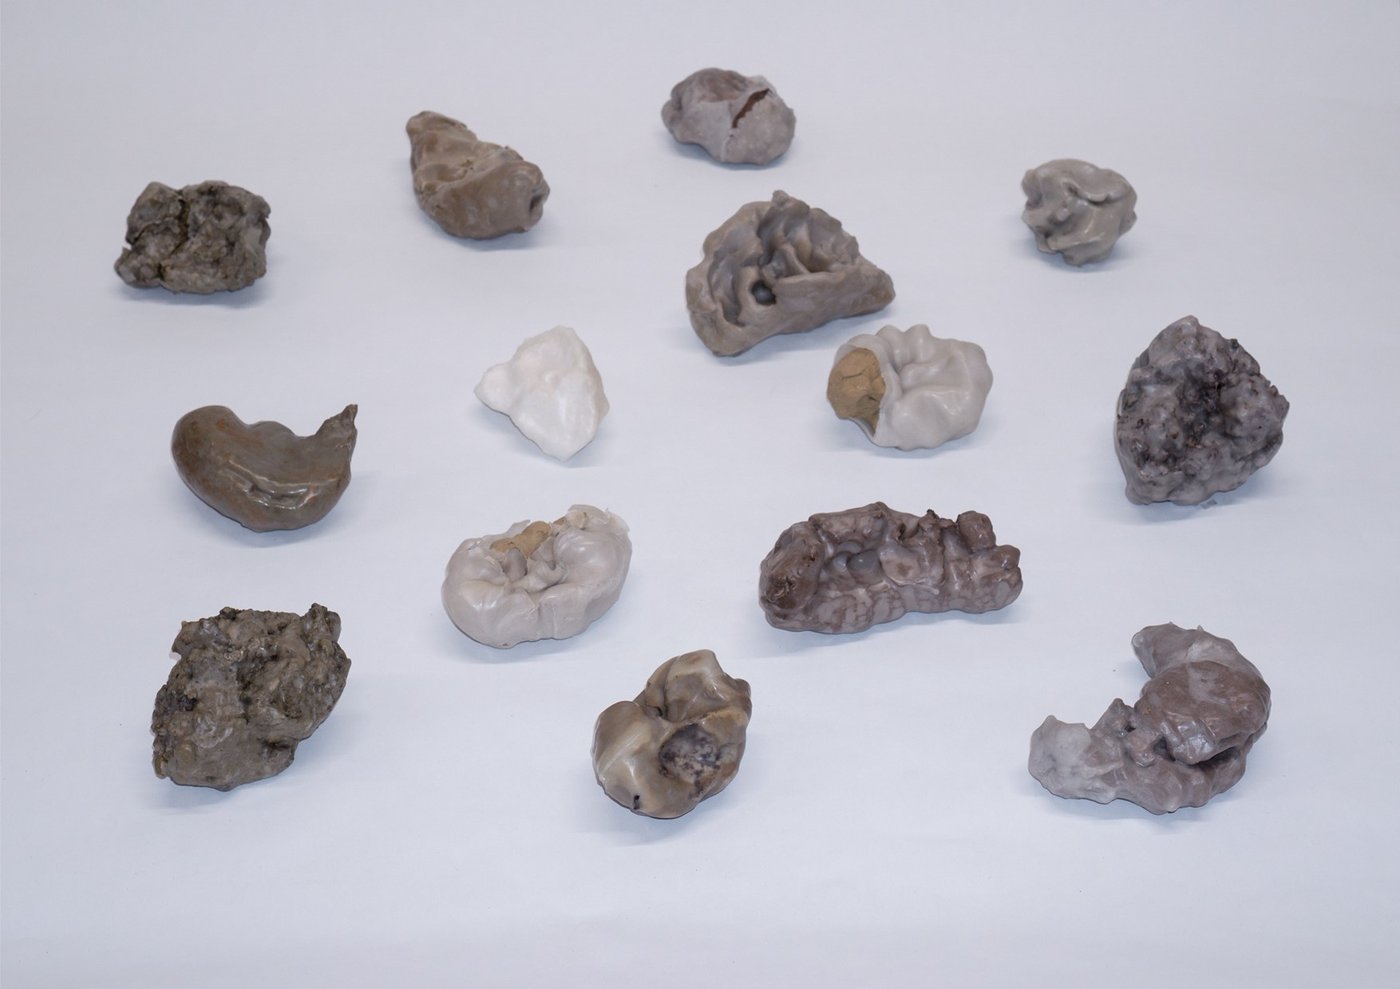 Various stone-like objects can be seen in the photograph